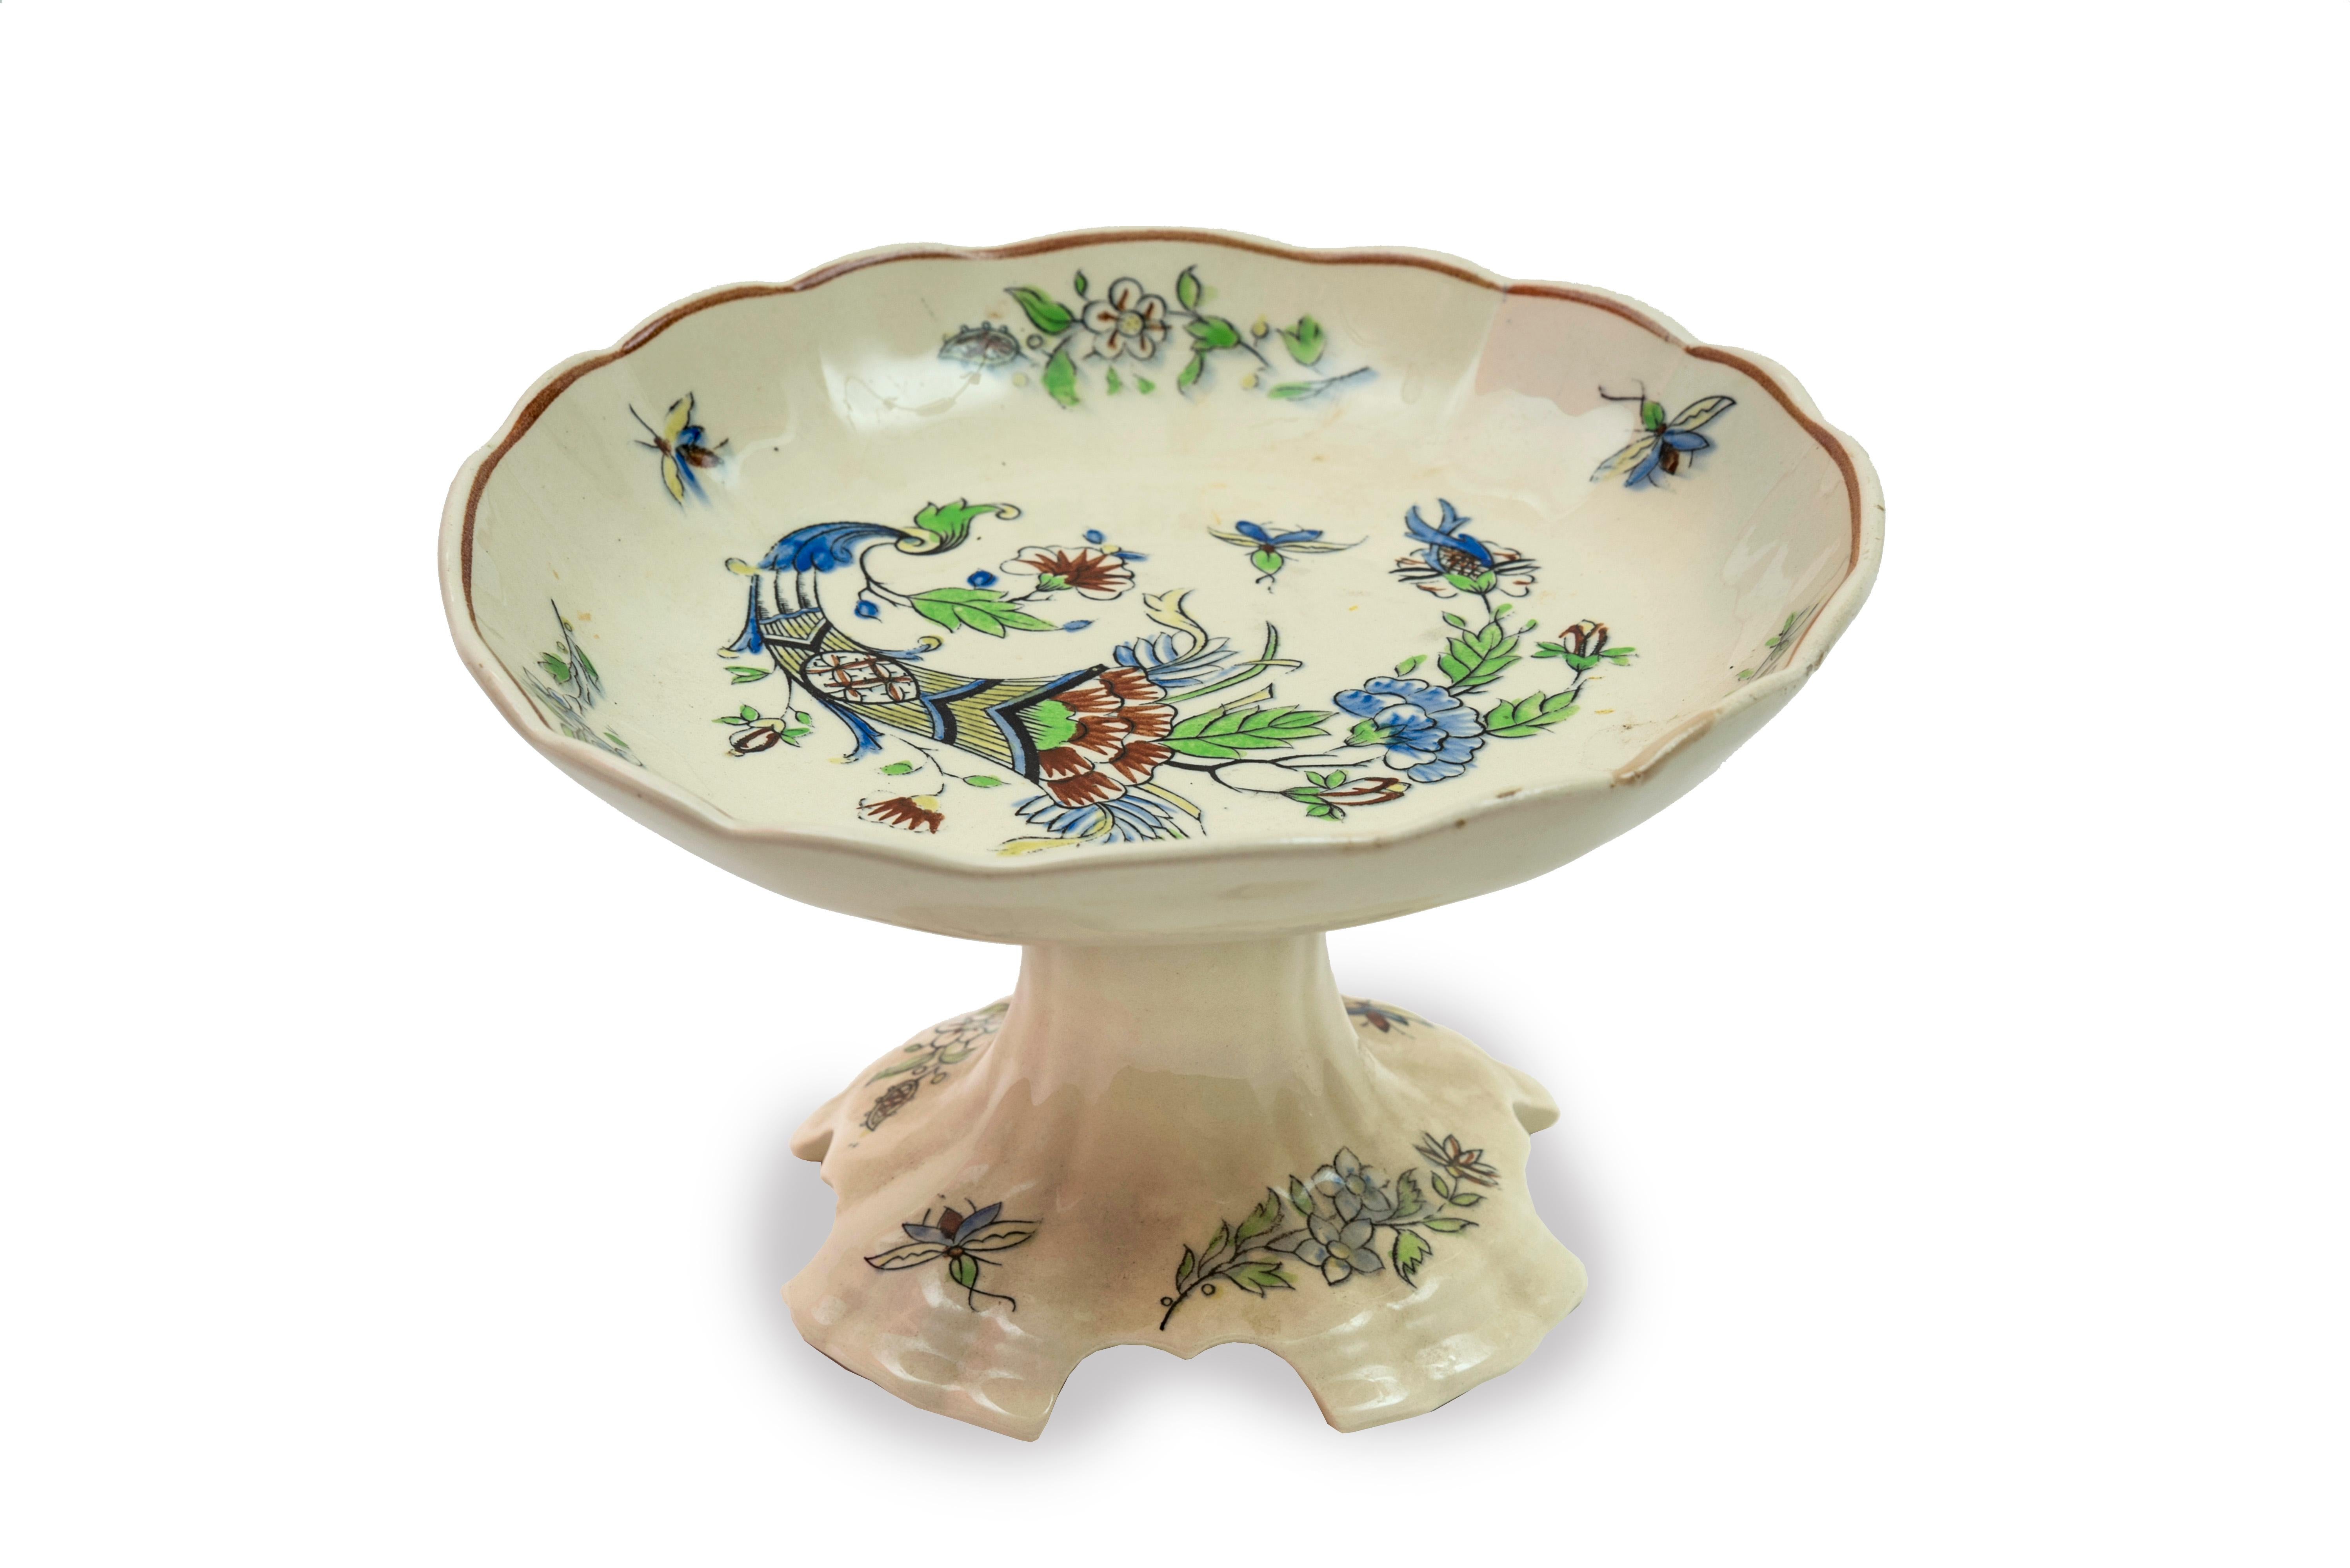 Table Service with Cornucopias, Keramis, Boch Freres, Early 20th Century For Sale 1